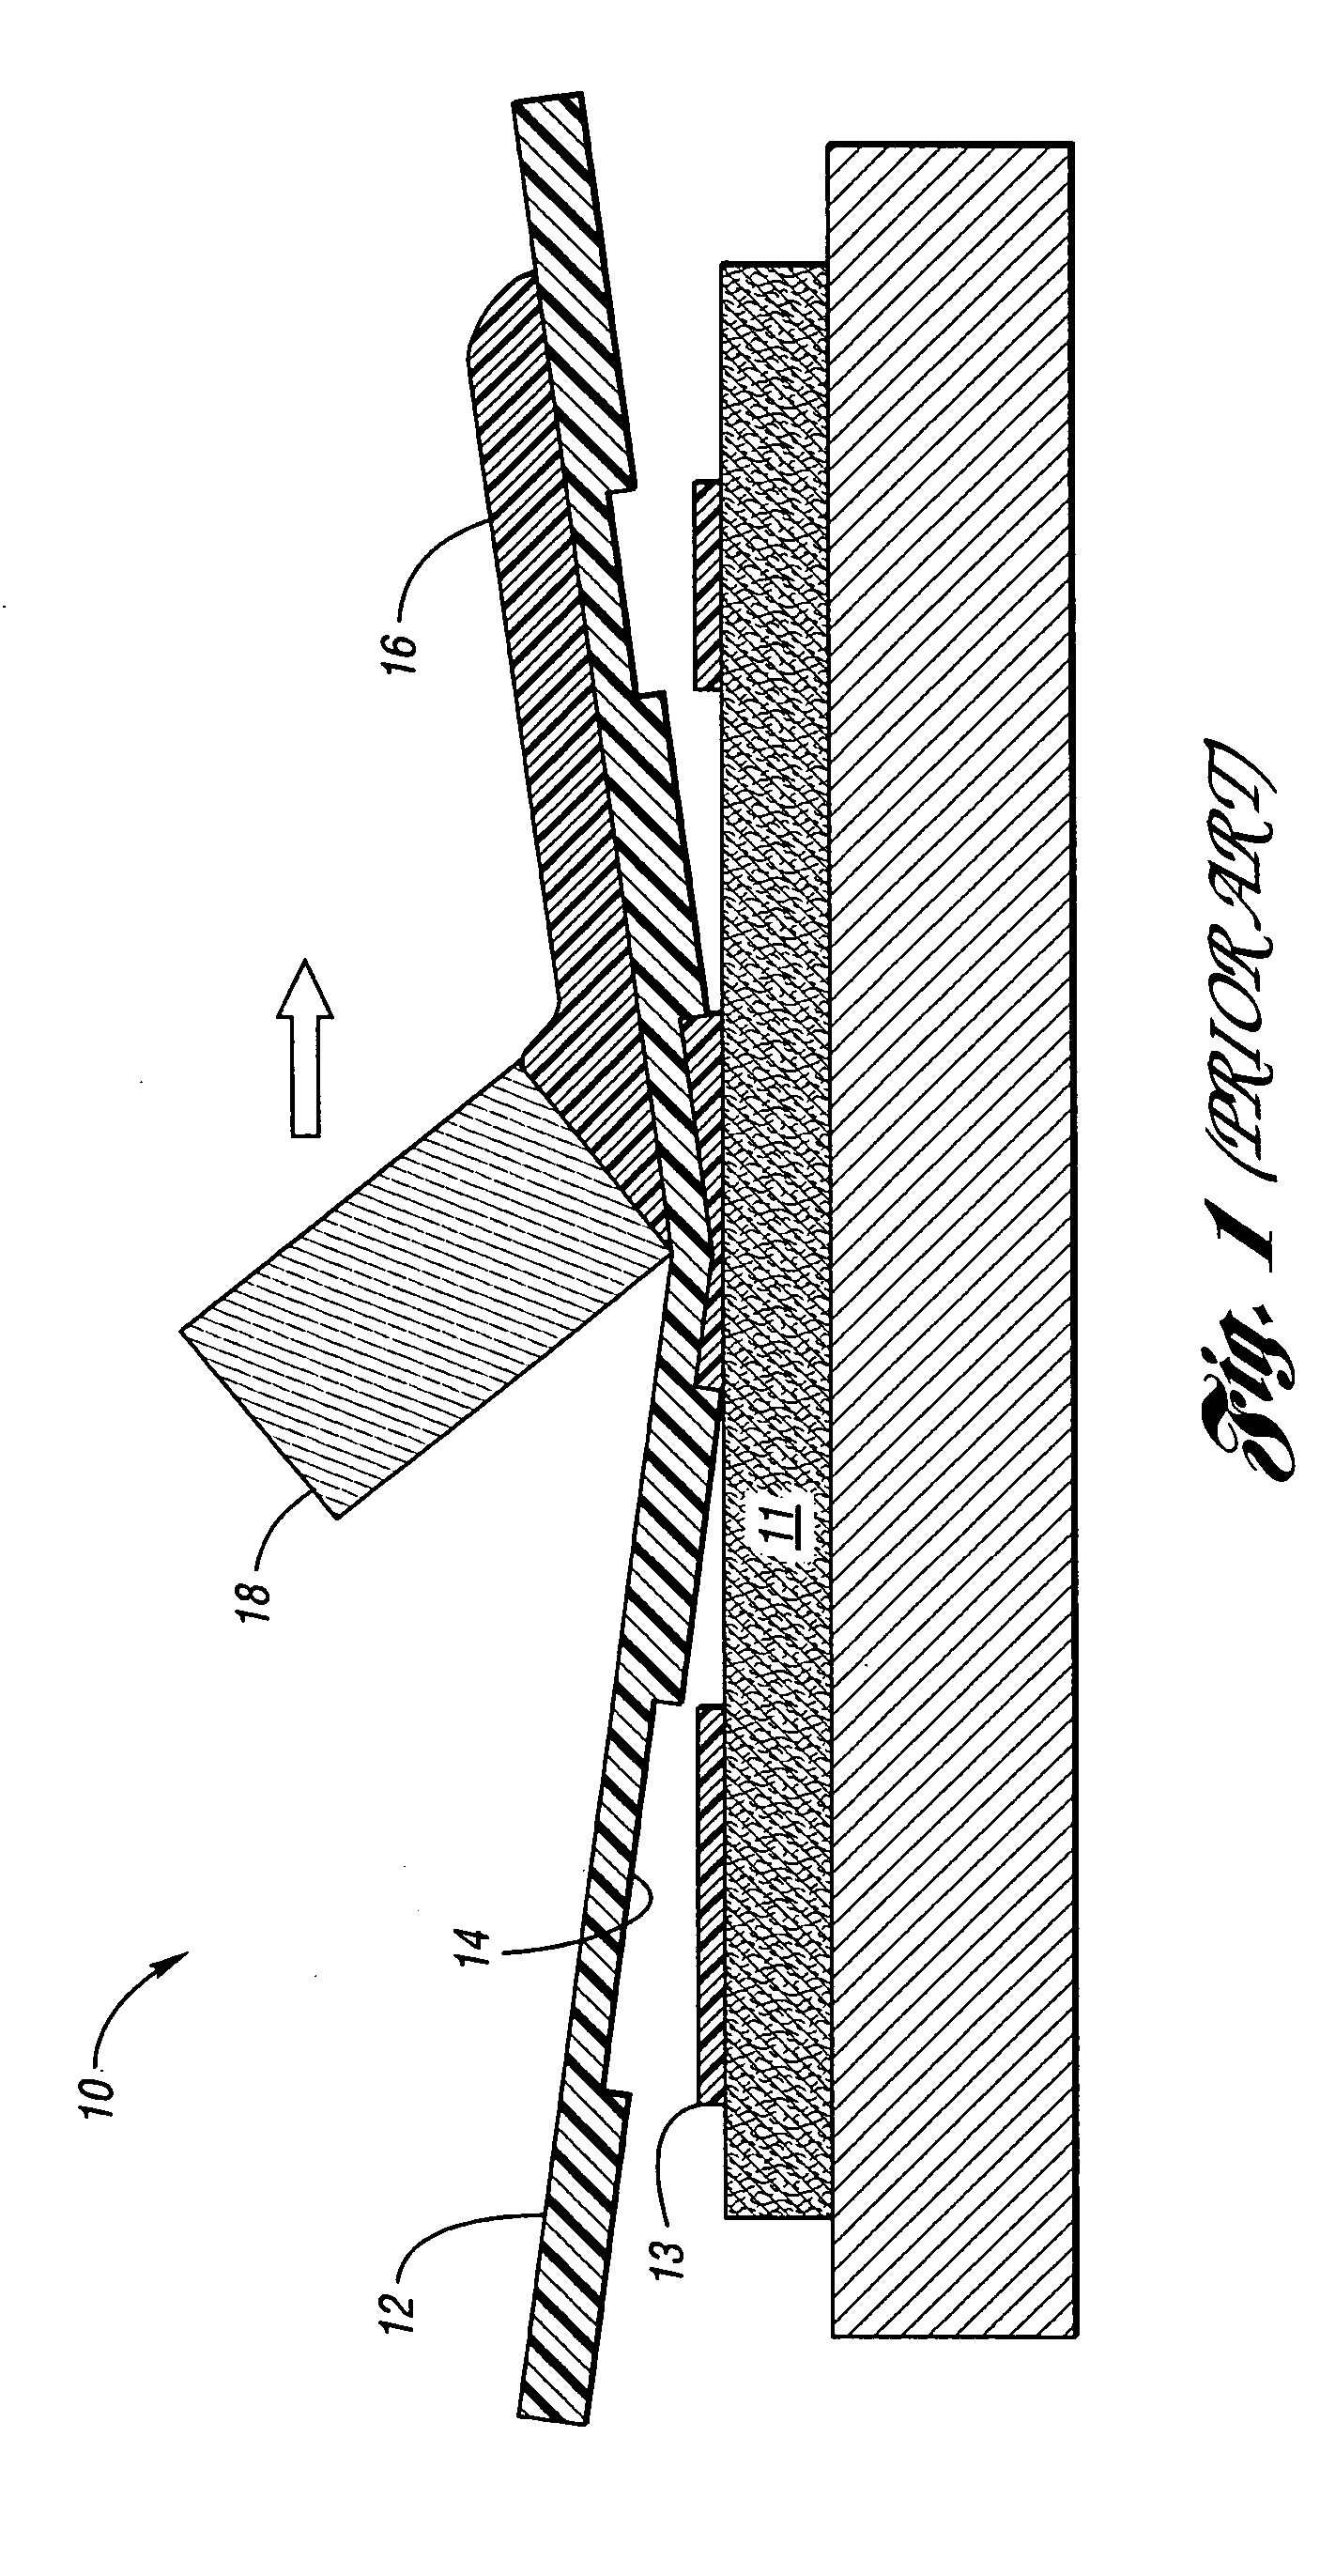 Inks for use in membrane image transfer printing process